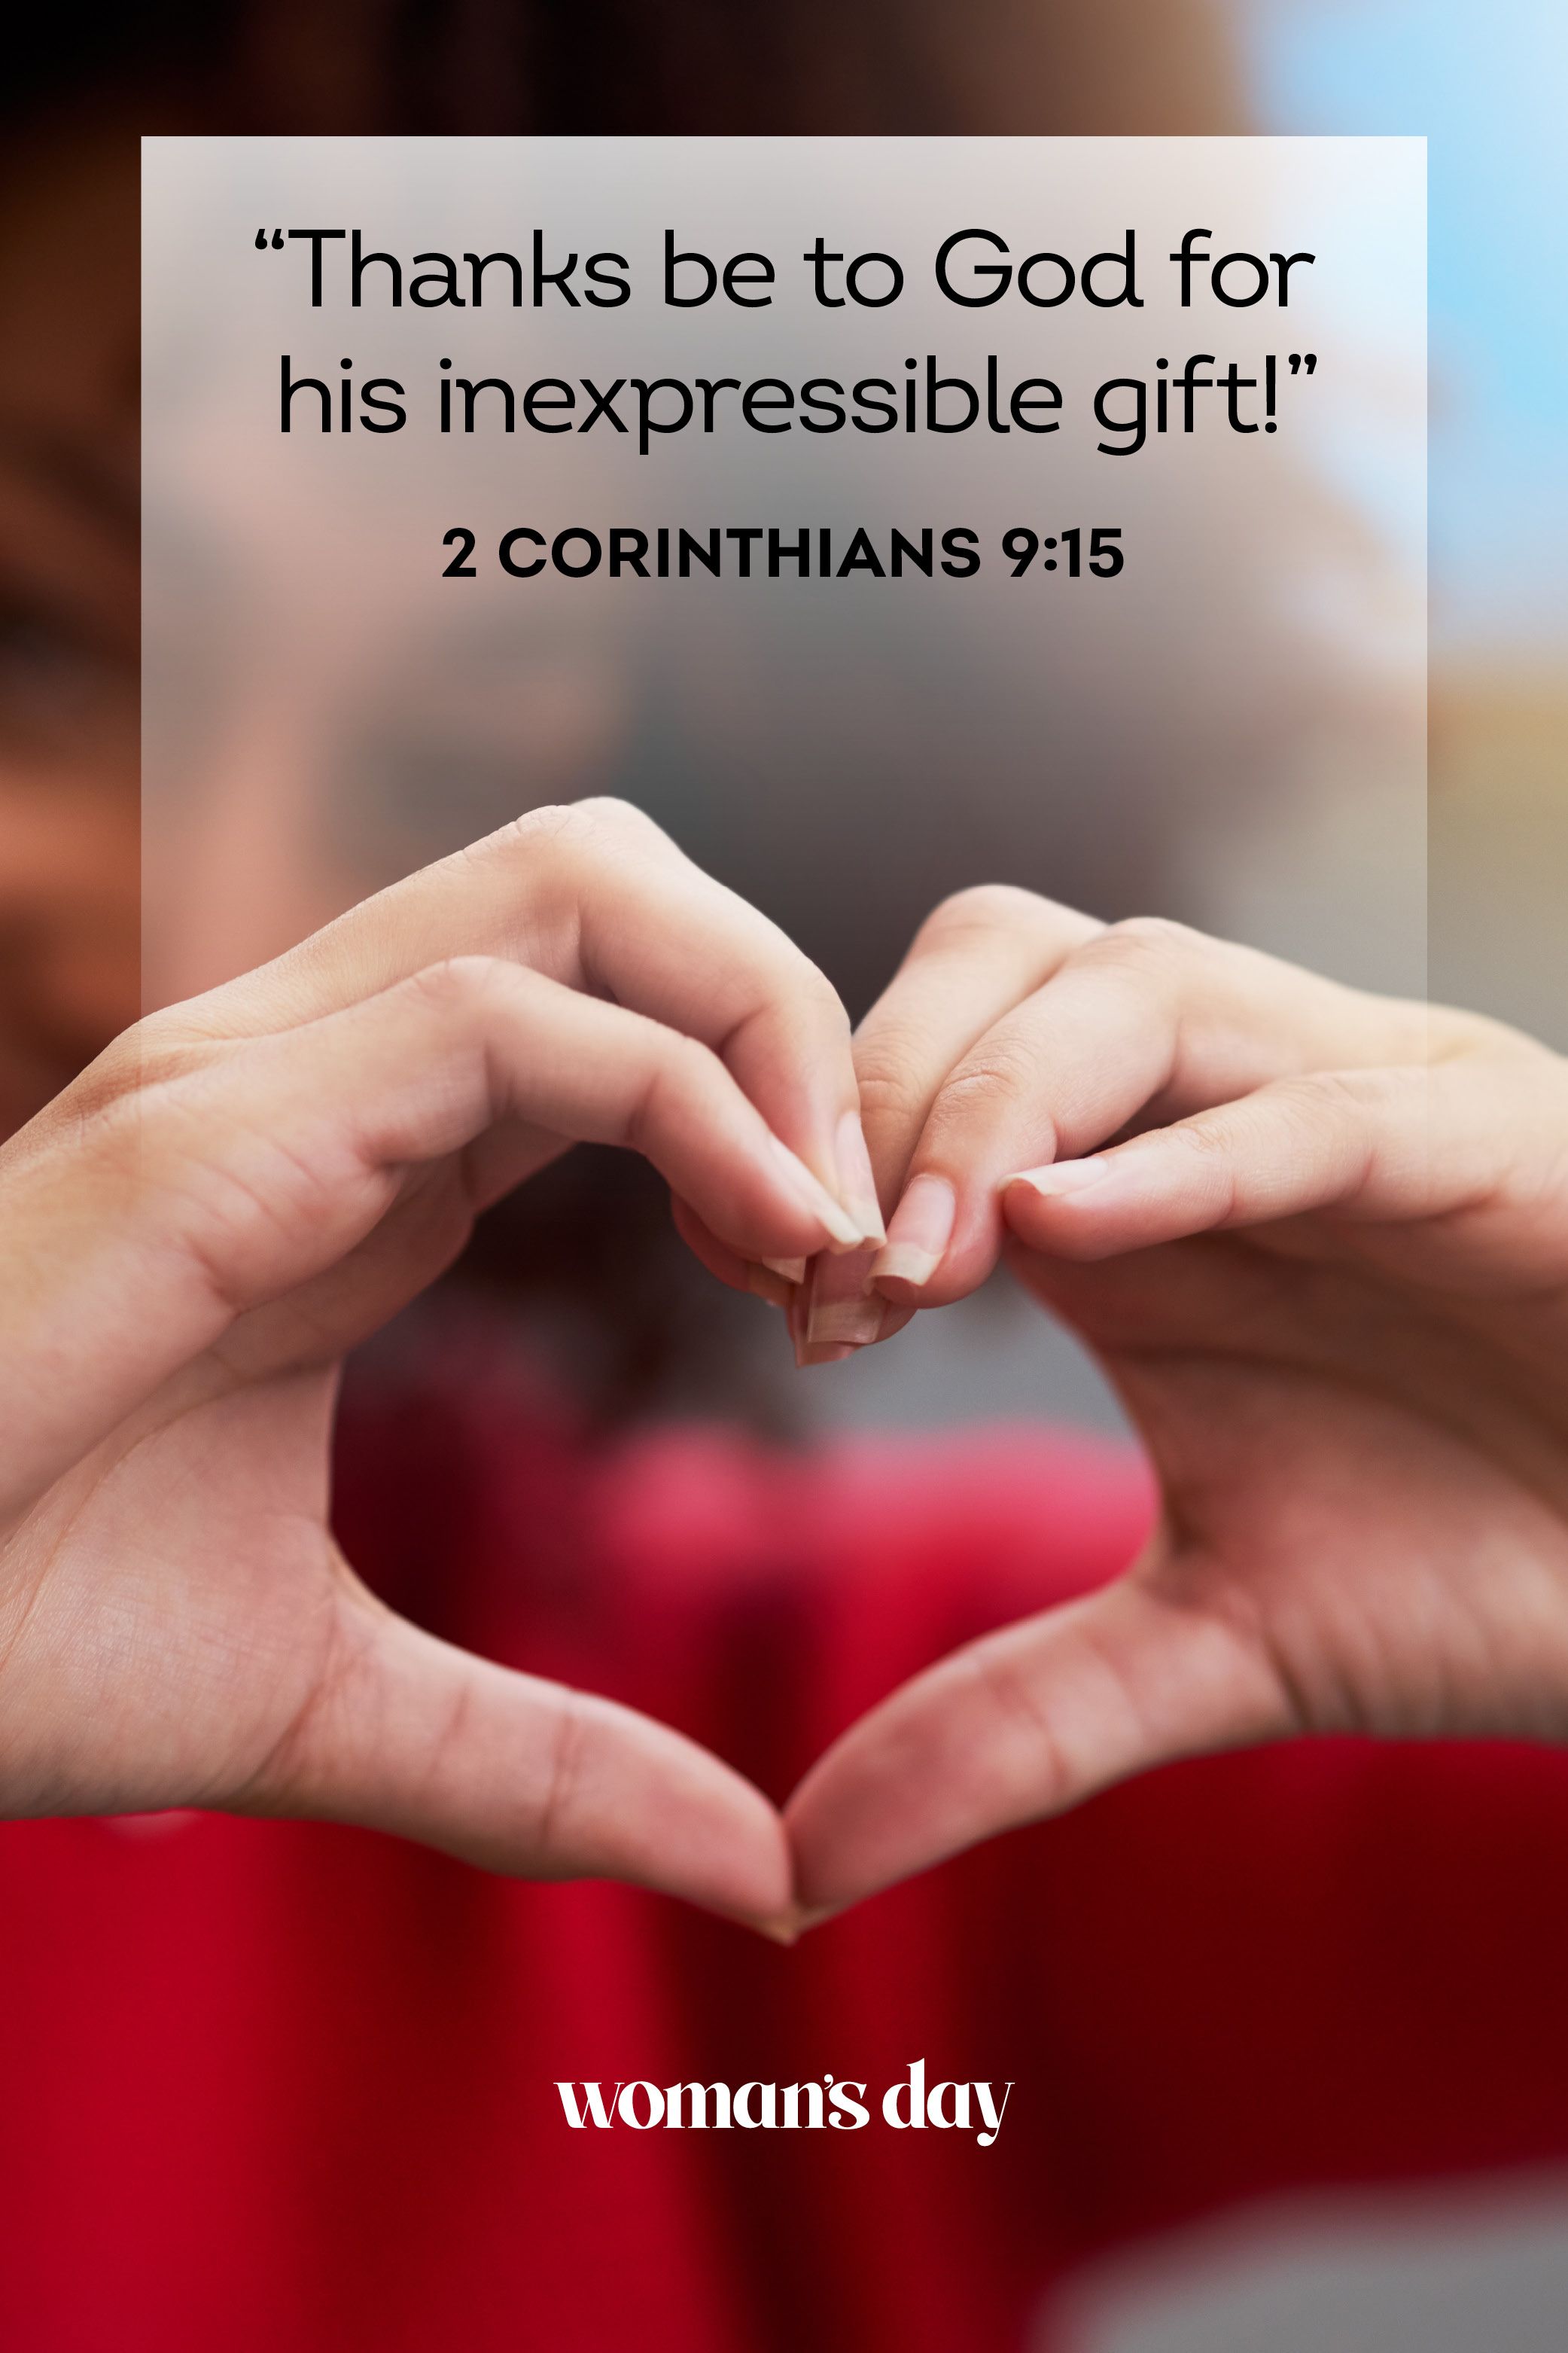 18 Encouraging Bible Verses About Using Your Gifts, Using Your Gifts For  Good, Using Our Gifts, & Using God's Gifts. – Daily Bible Verse Blog